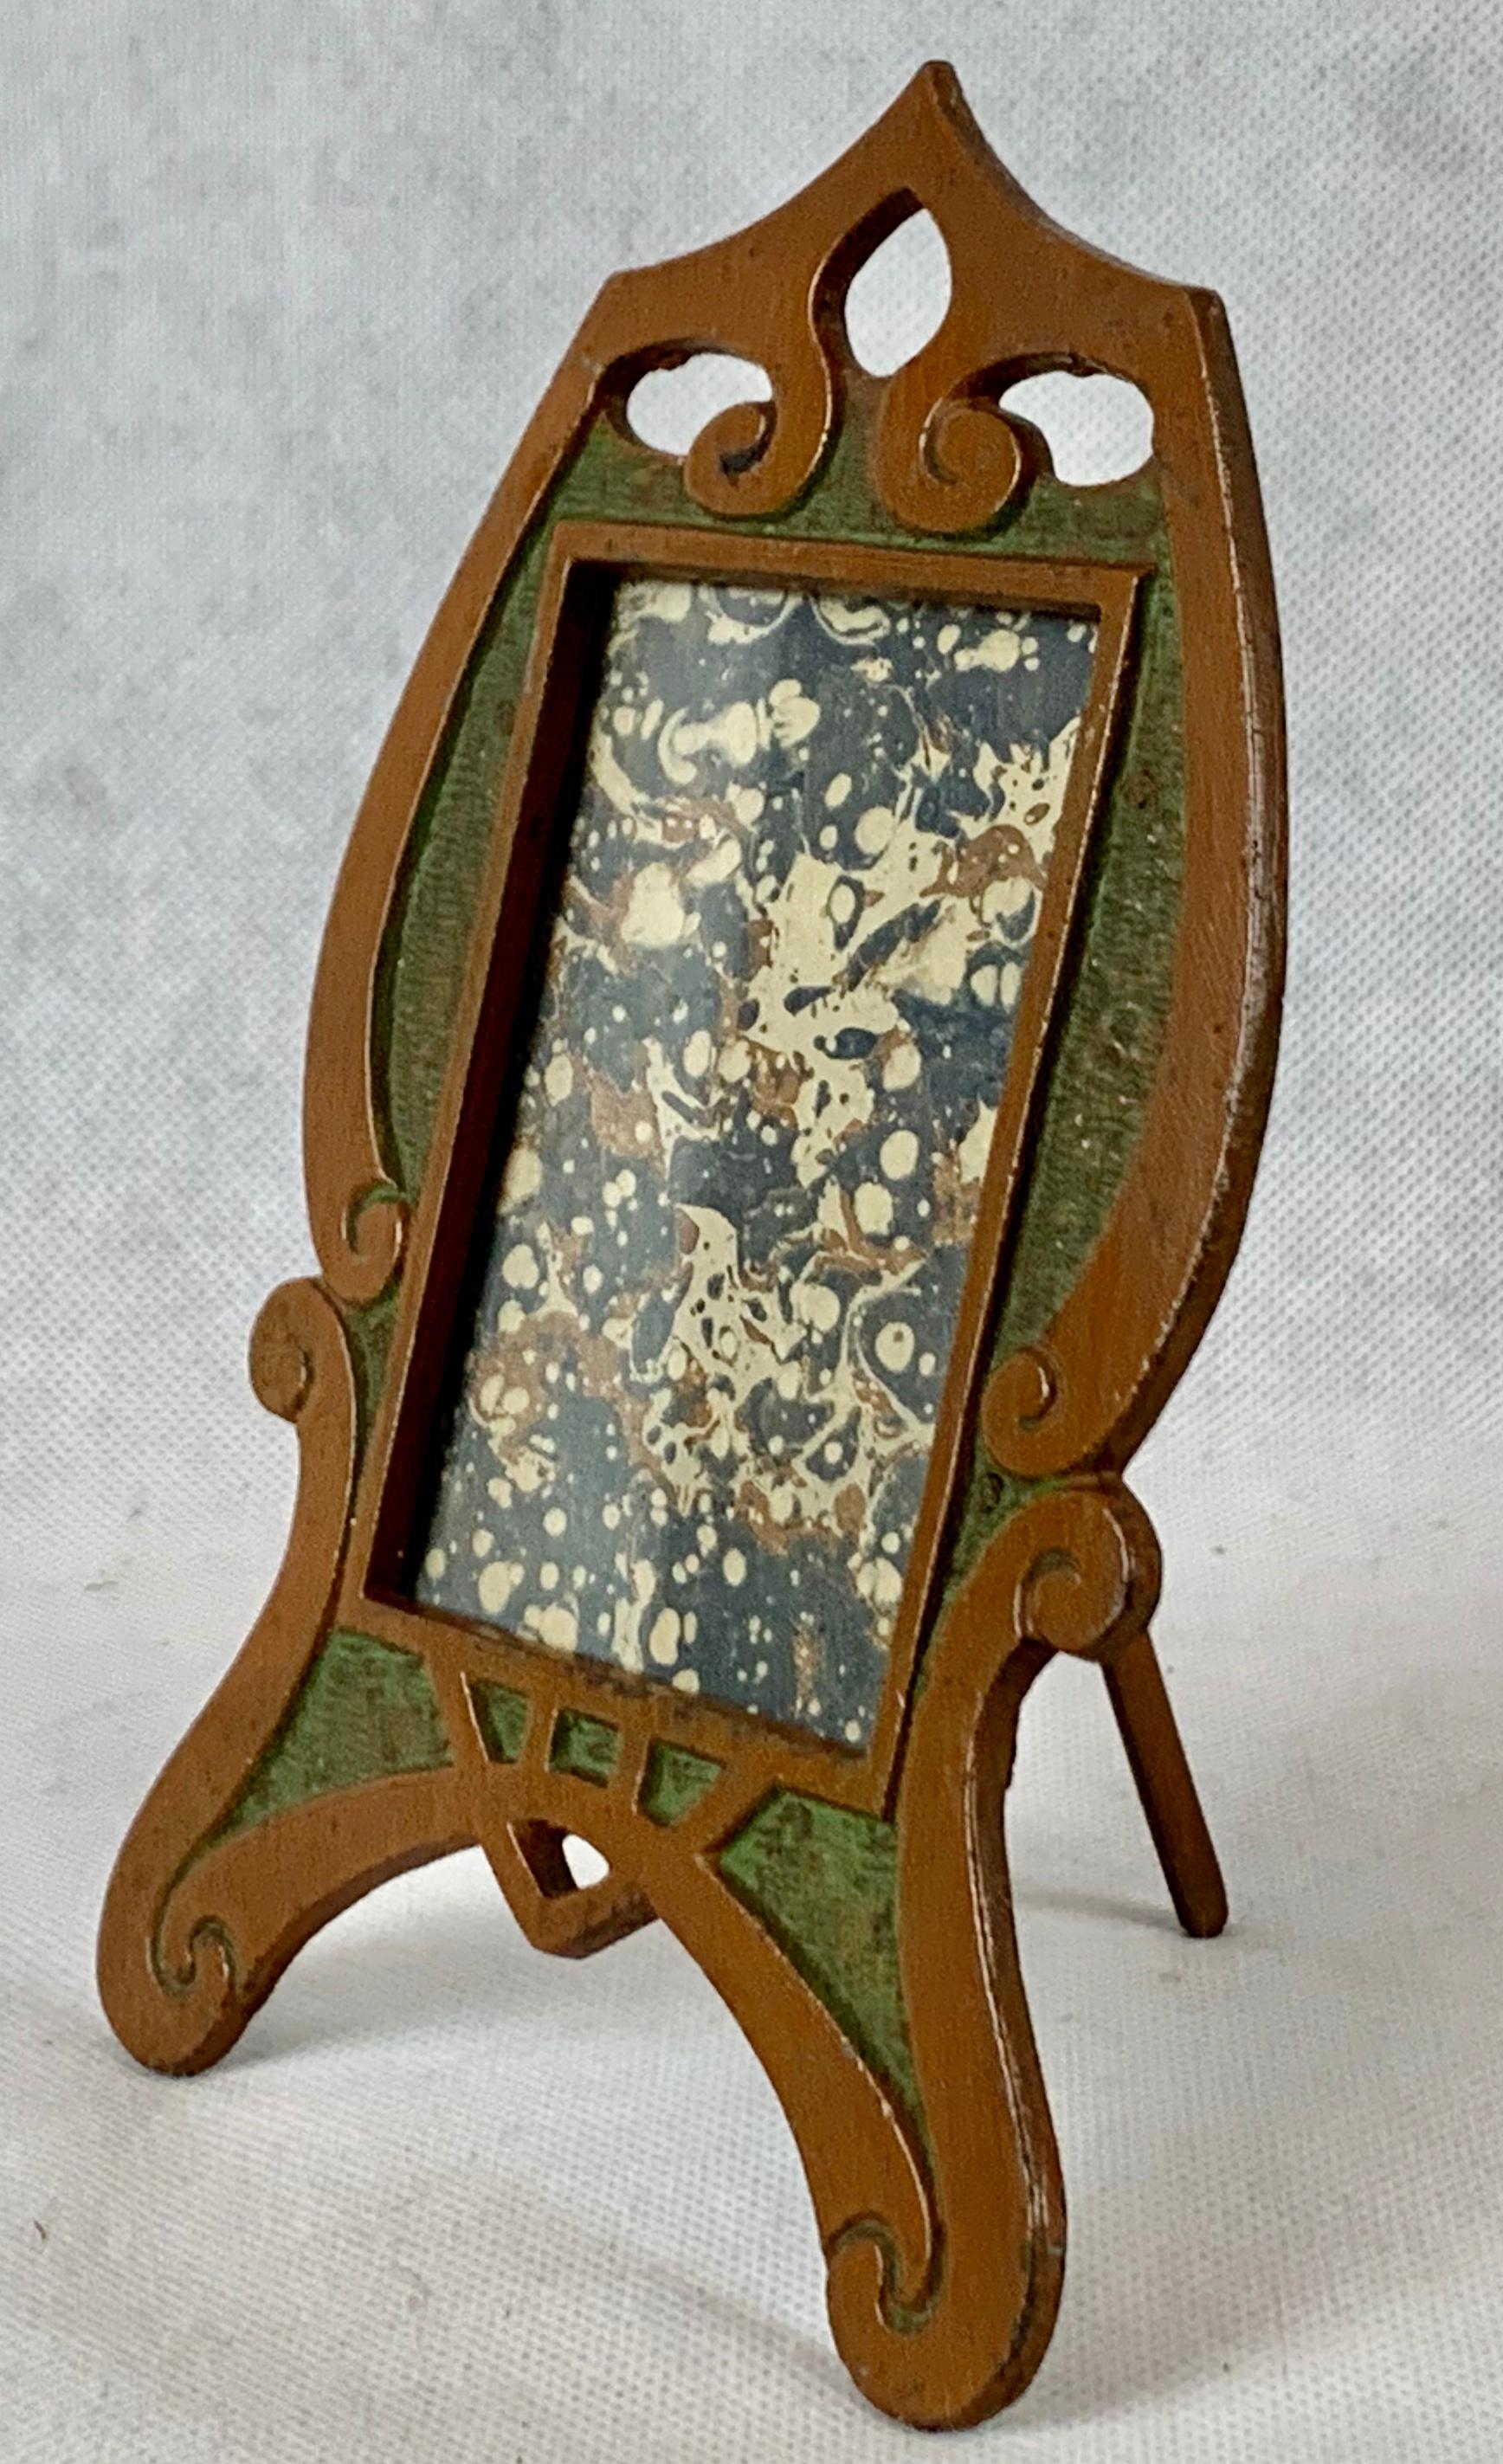 An Art Nouveau patinated and enameled photo or picture frame. A fine simplified example from this period without female forms and flowing vines and flowers. There is an easel back.
Measures: Height 5.5